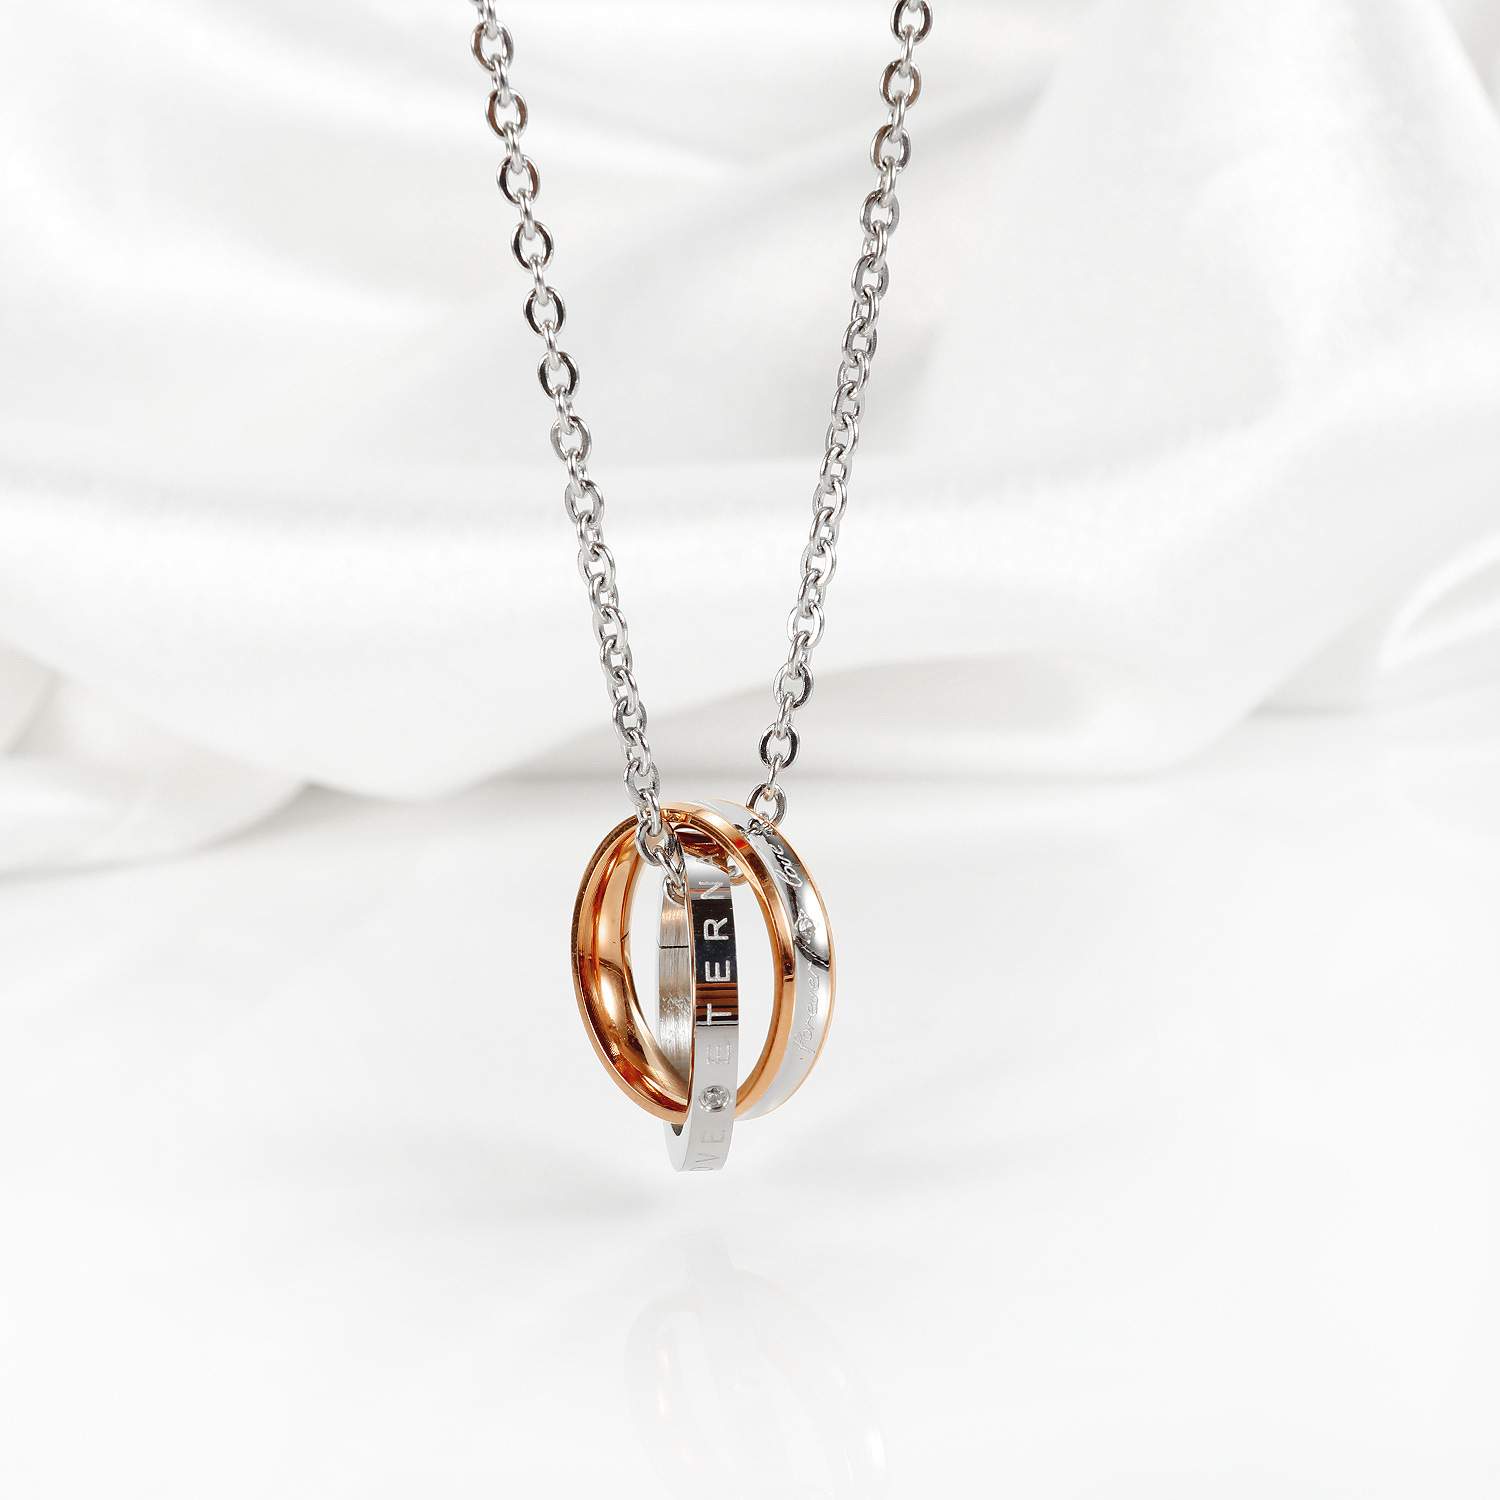 2:Rose Gold Plated Pendant   Chain